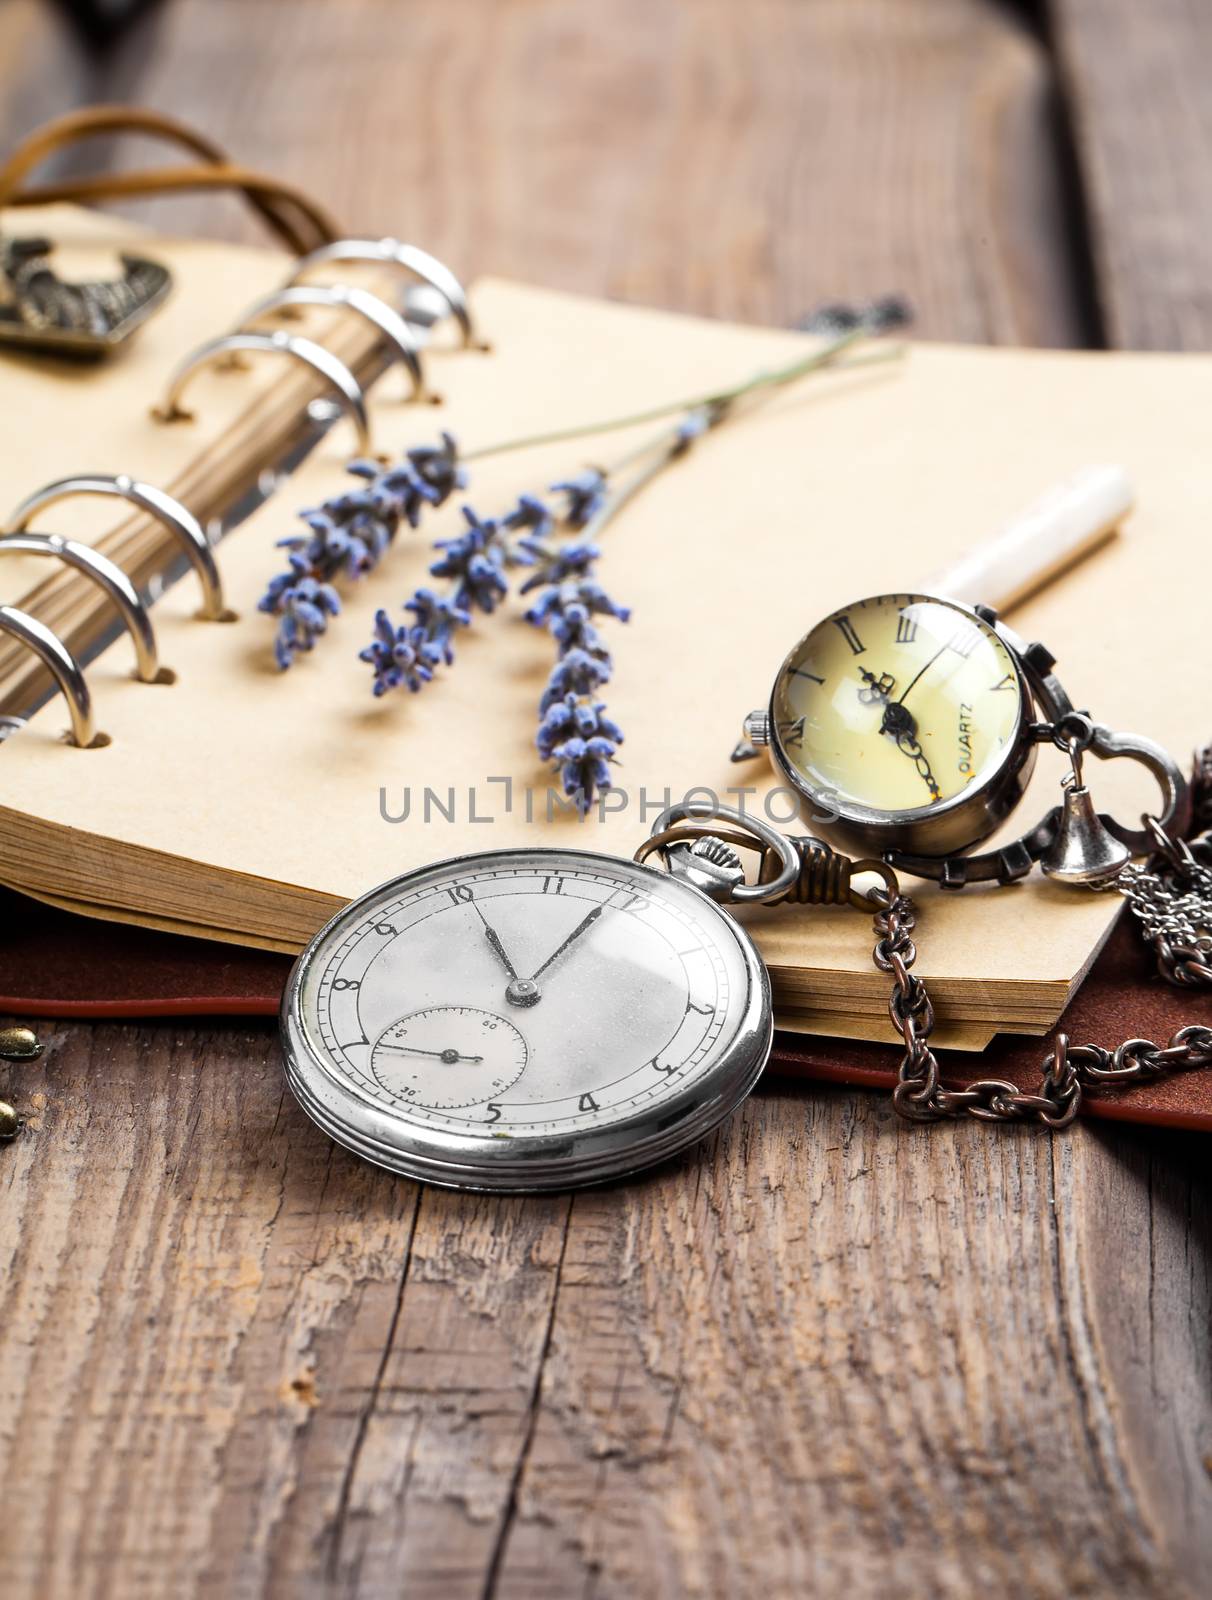 Vintage grunge still life with pocket watch, lavender flower and by motorolka